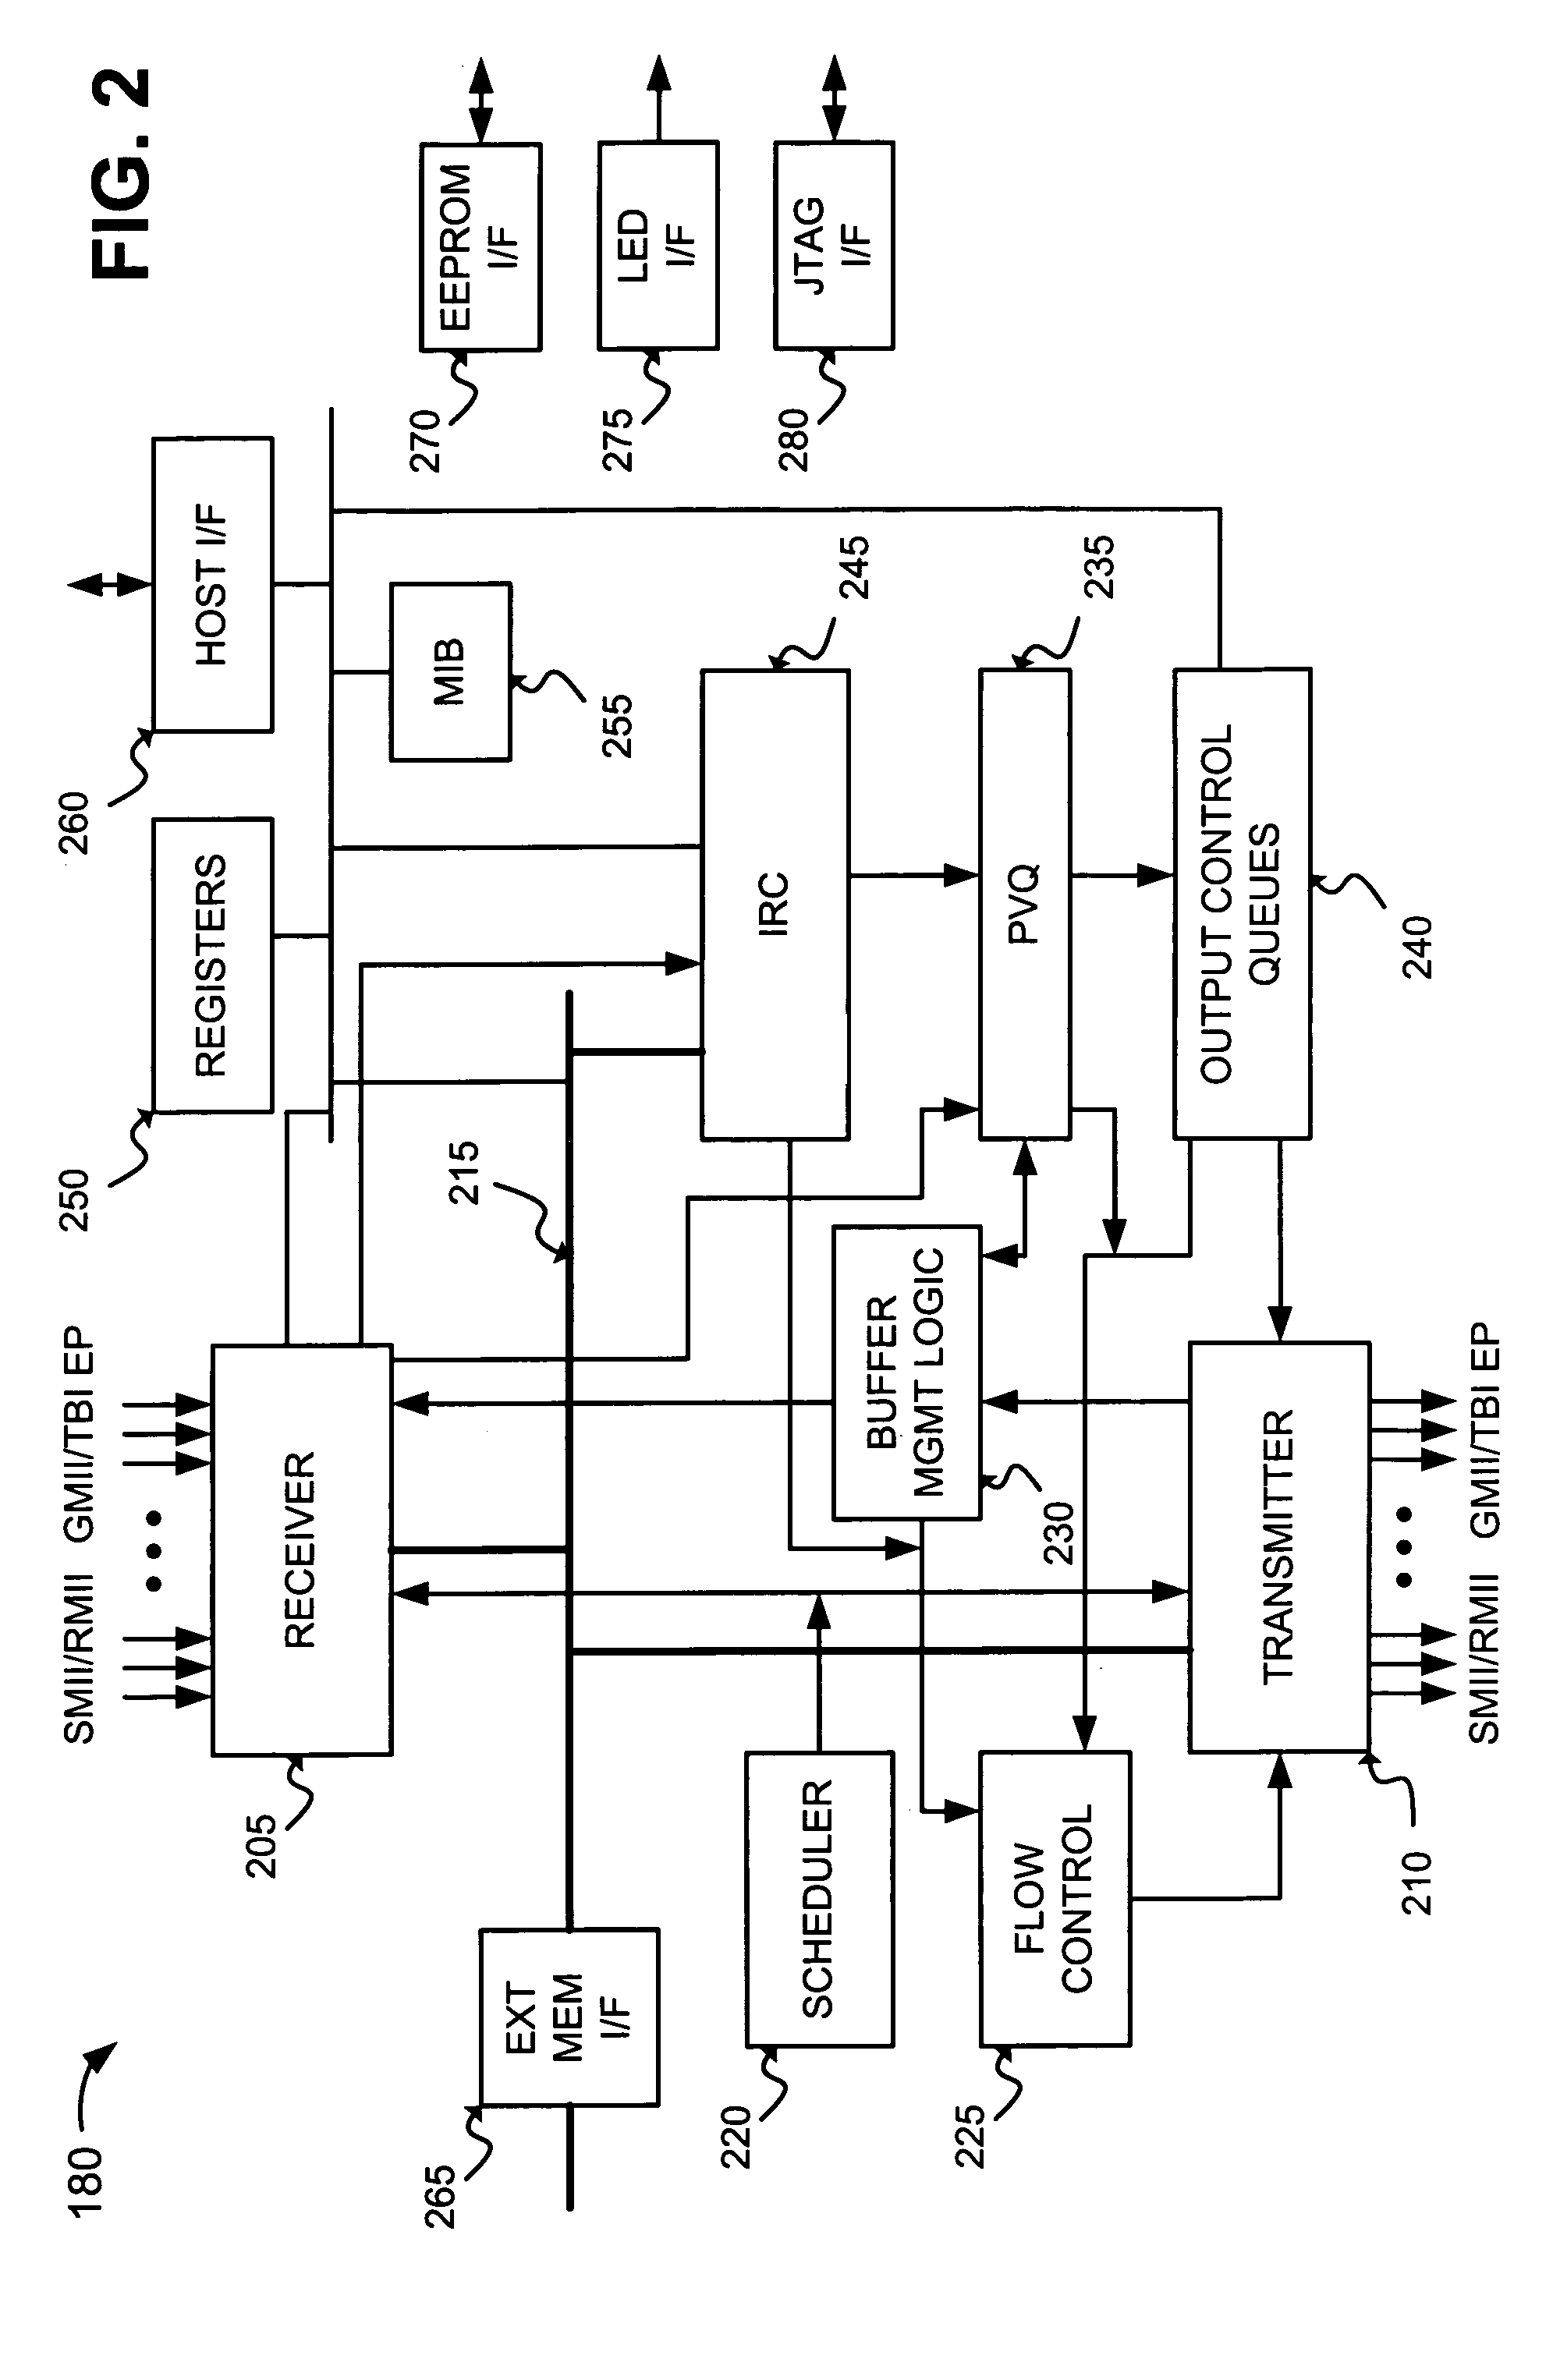 Method and apparatus for performing priority-based flow control